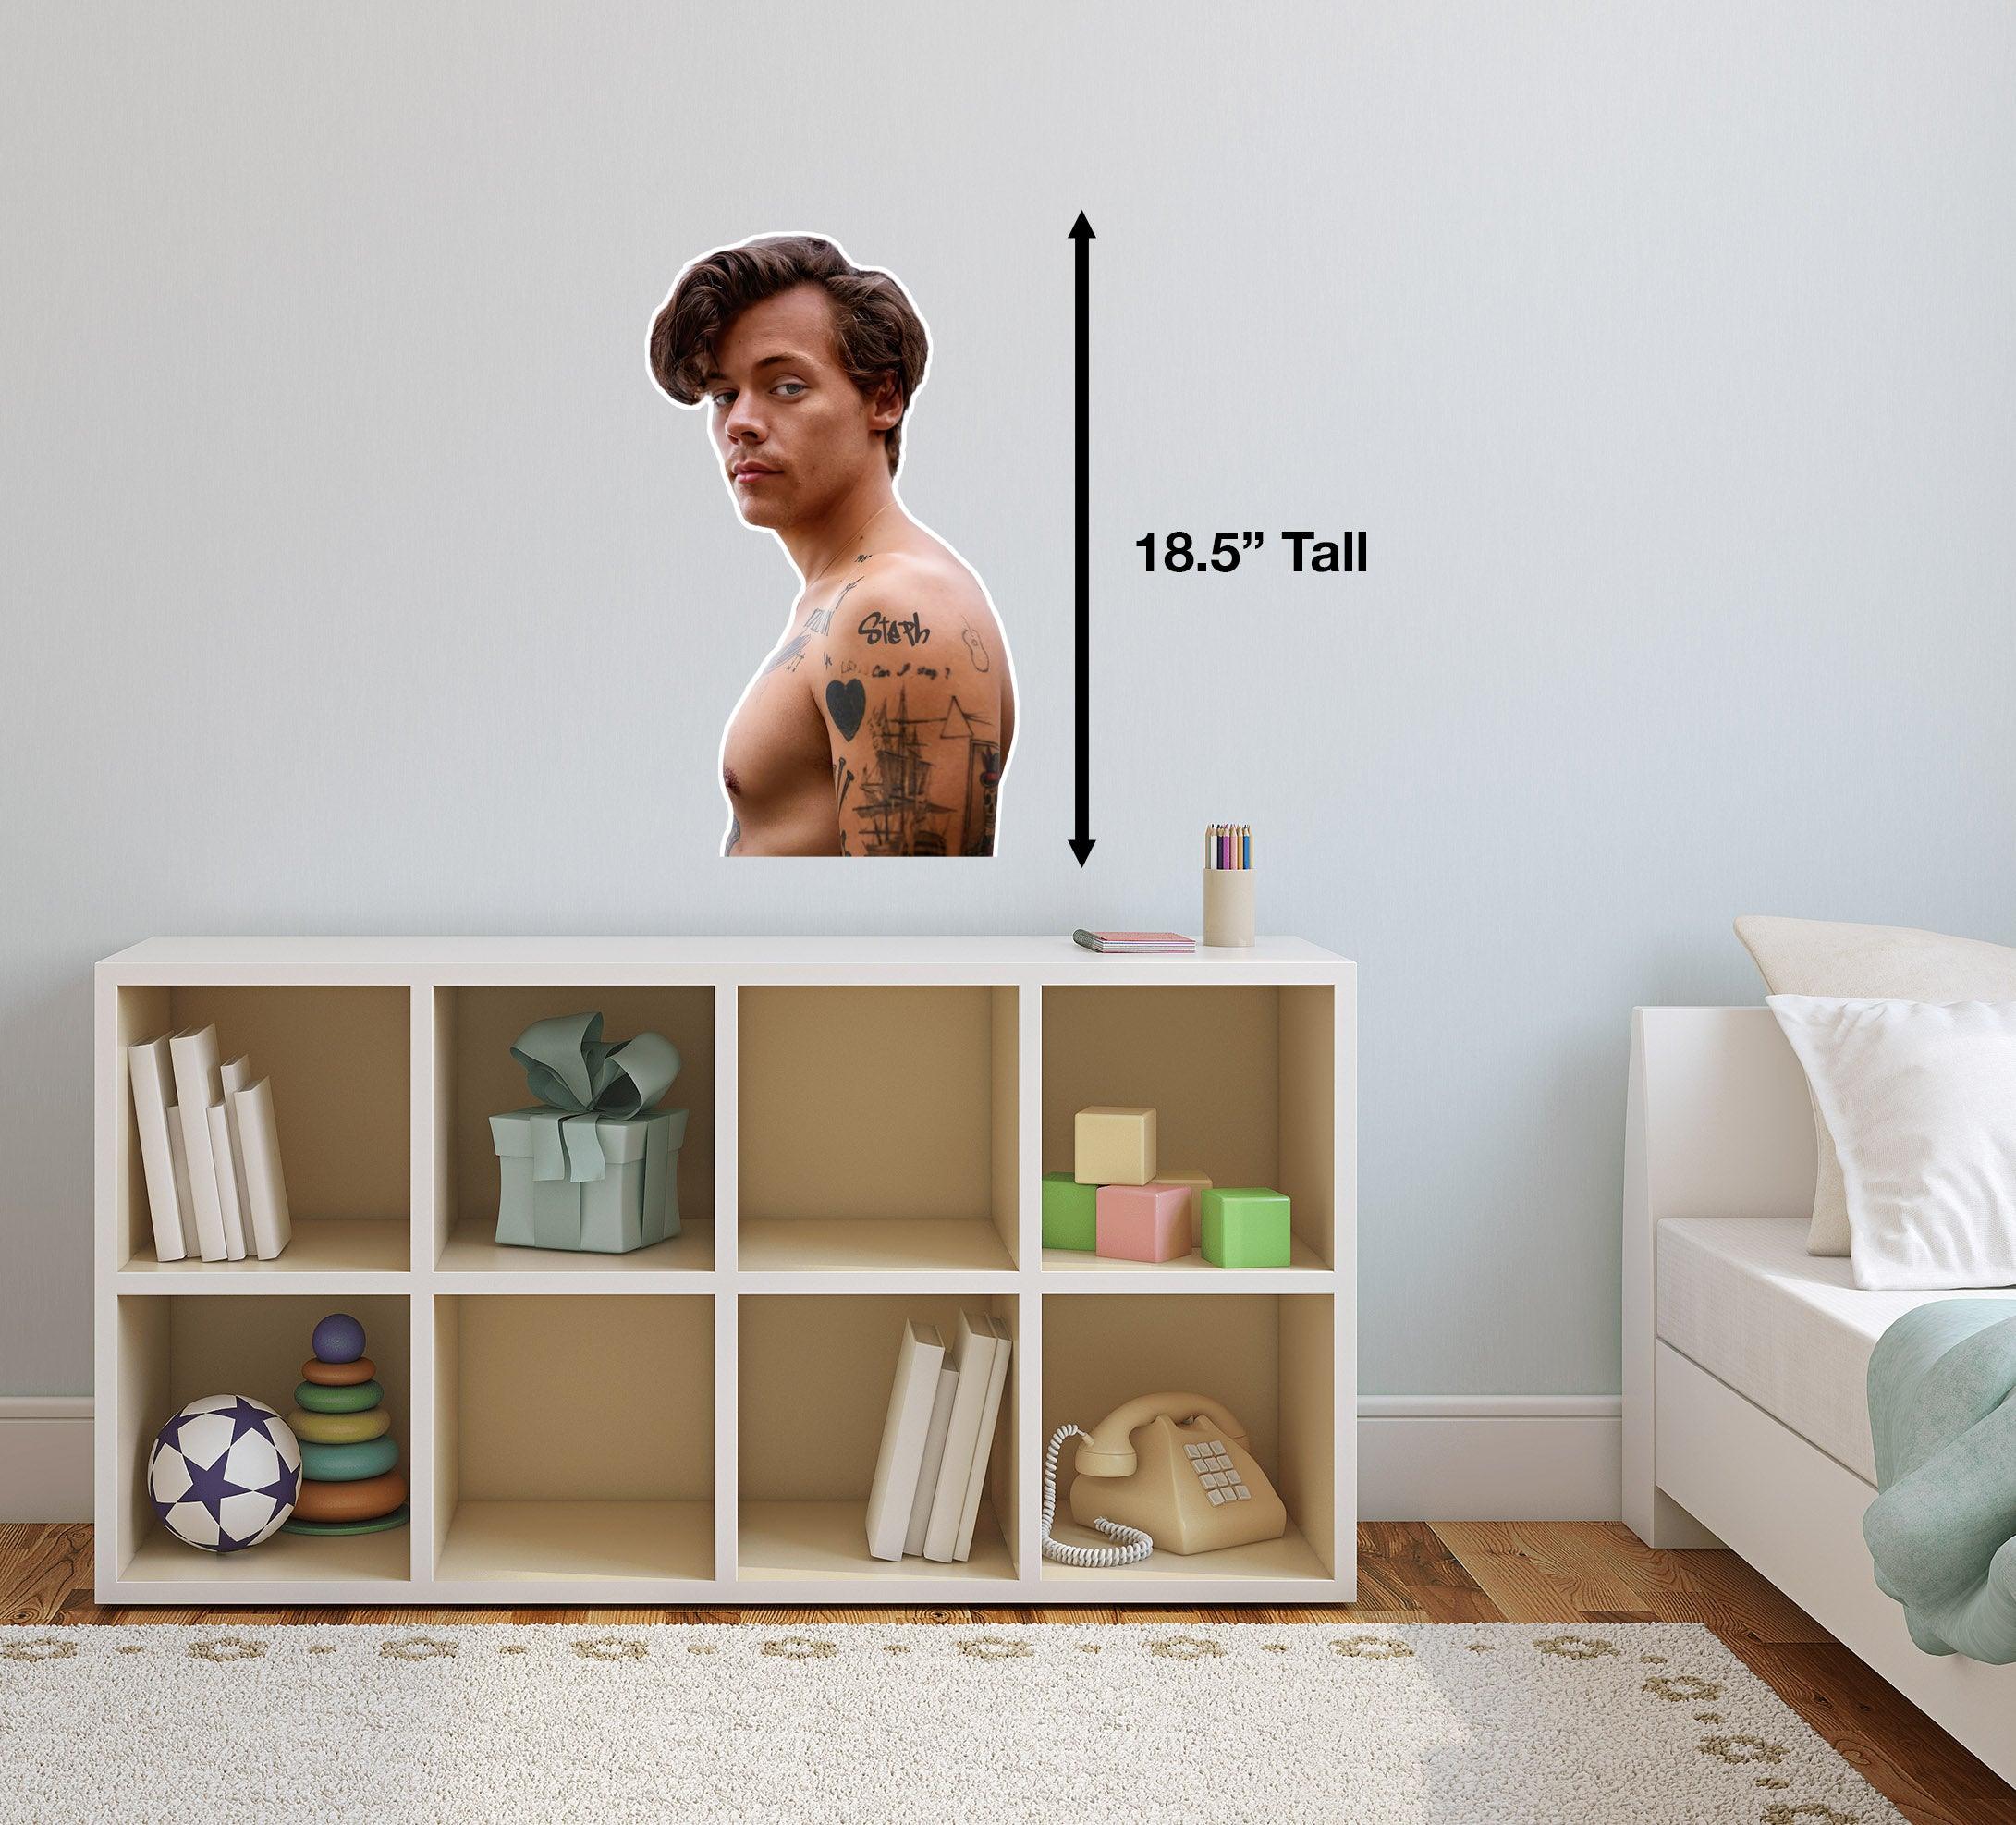 CoolWalls.ca Sticker Harry Style Wall Cut out Sticker Decal: Peel-N-Stick: Customizable Tattoo